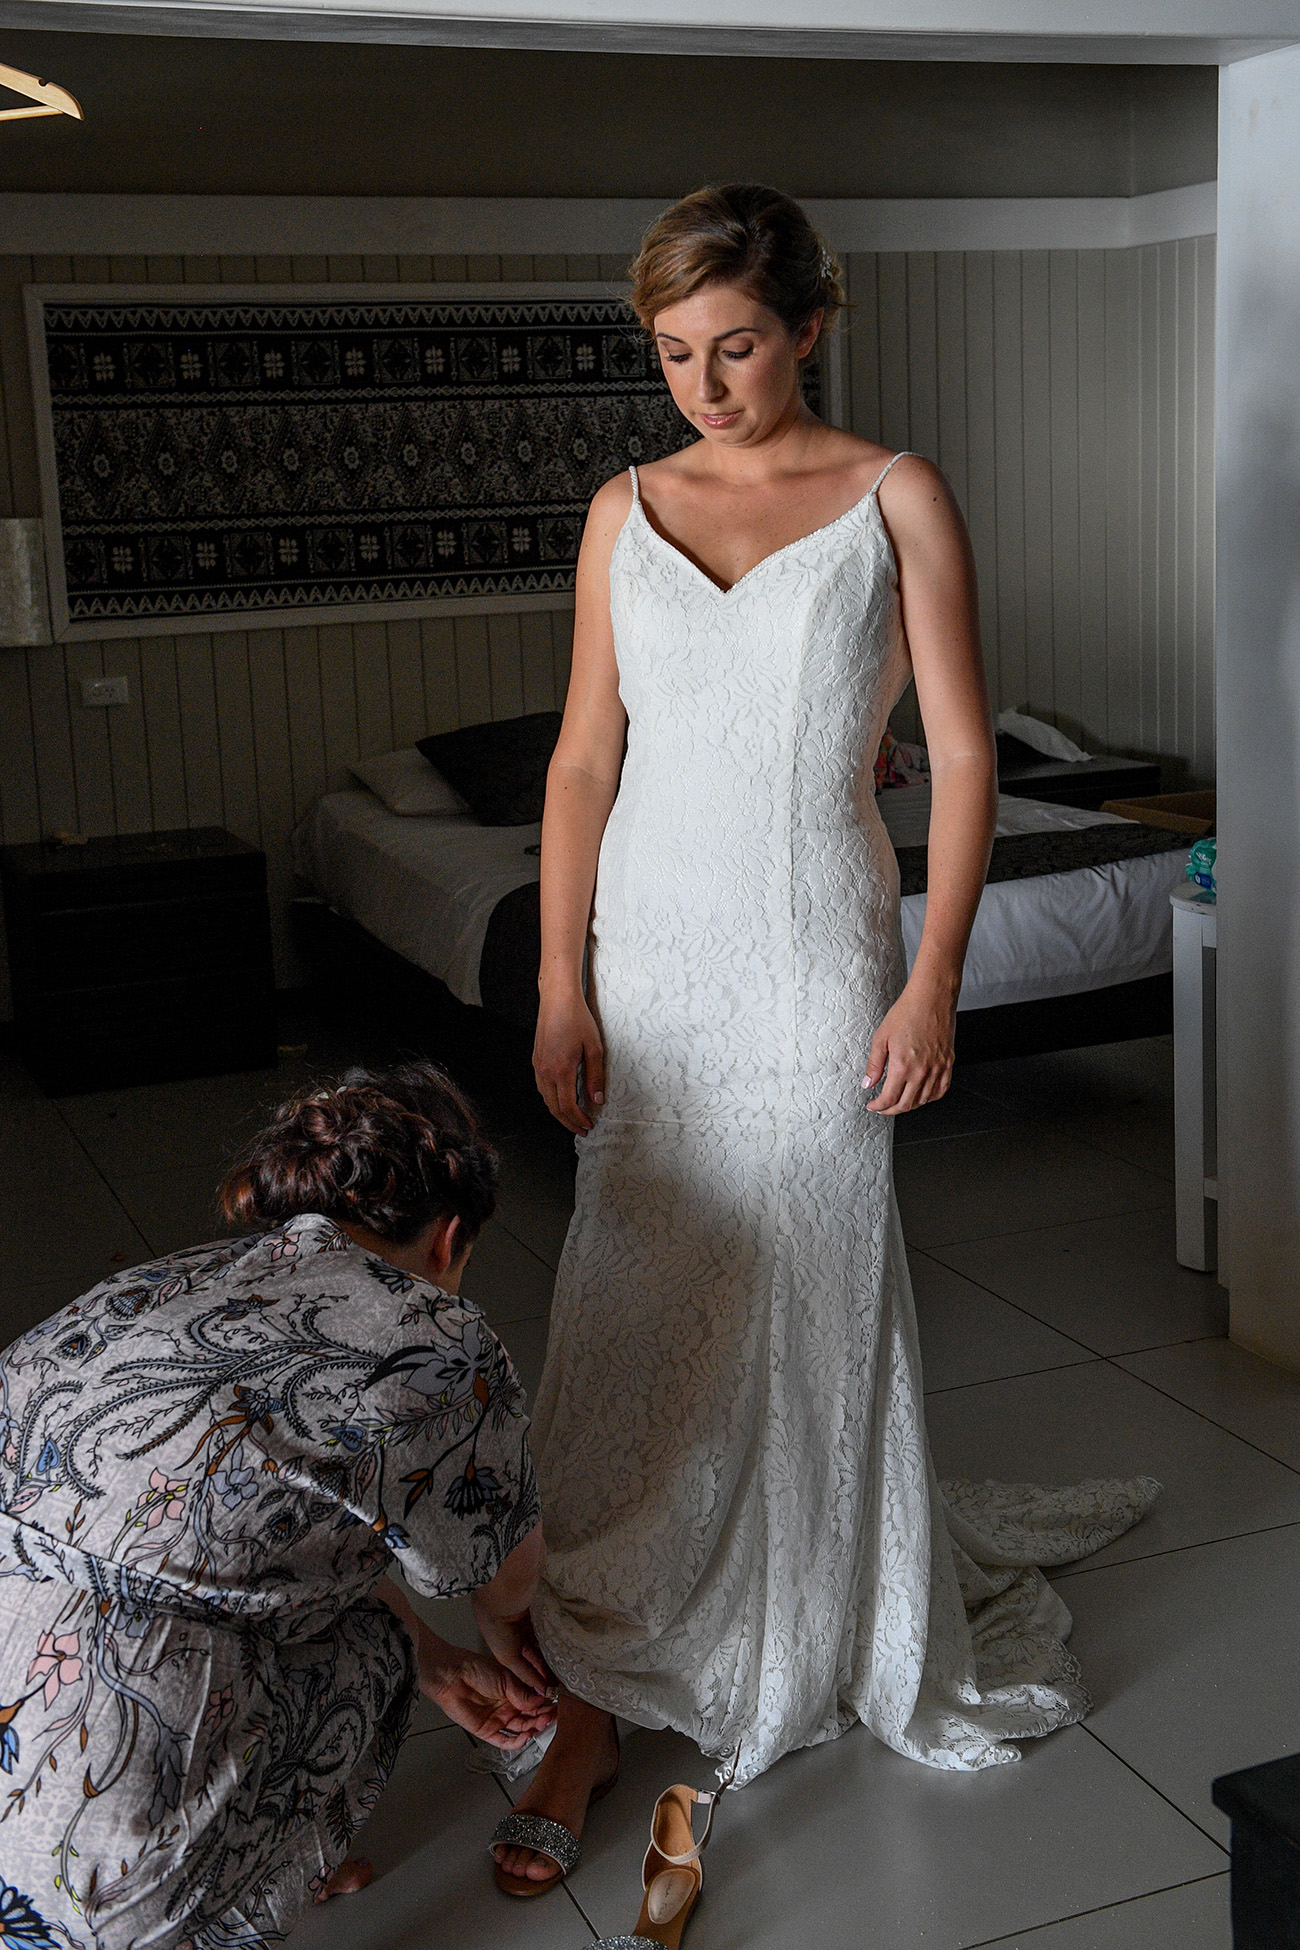 The bride steps into her silver sandals during wedding preparation